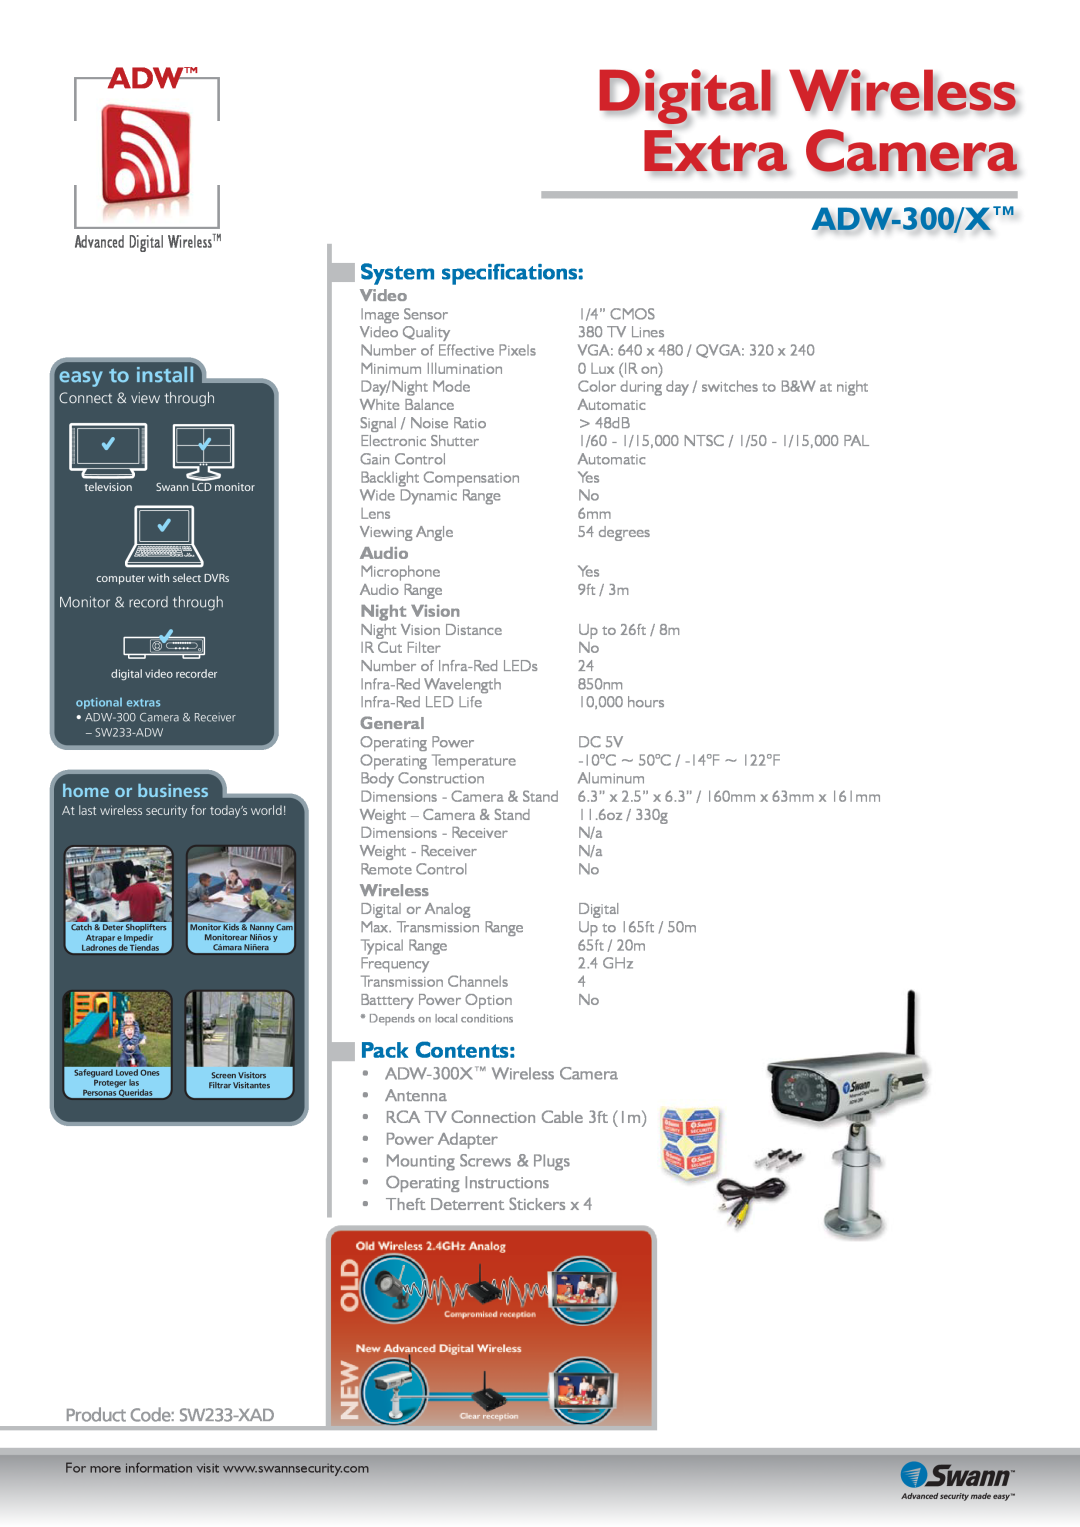 Swann ADW-300/X Digital Wireless, Extra Camera, Adwtm, System specifications, Pack Contents, easy to install, Video, Audio 